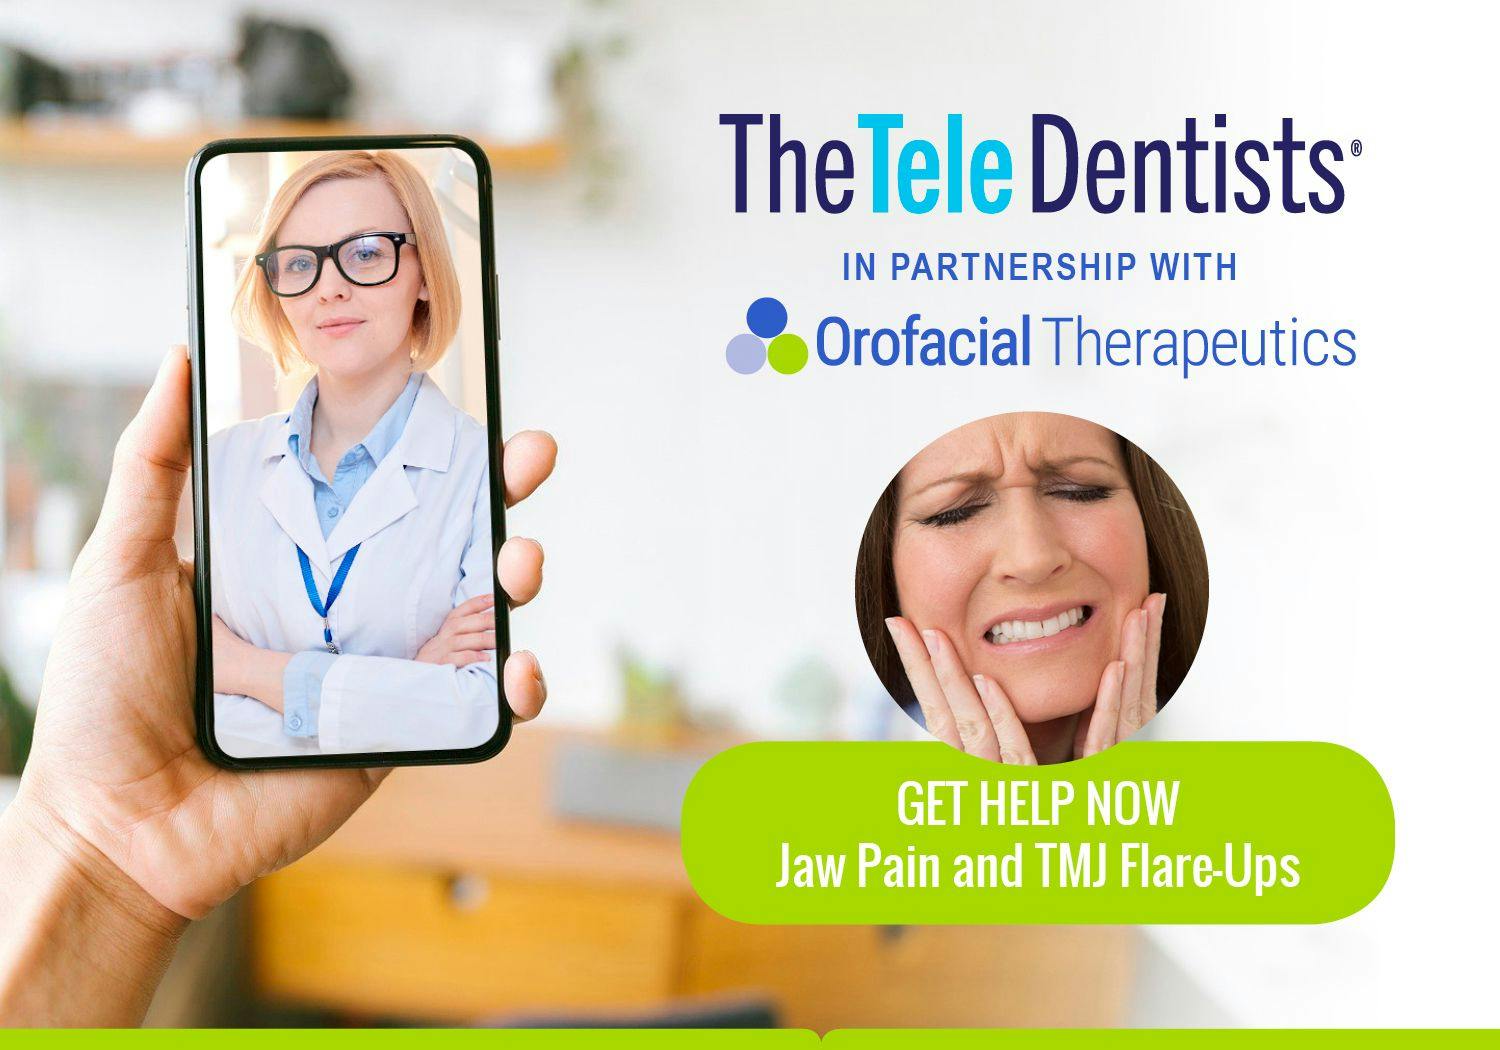 The TeleDentists, Orofacial Therapeutics  Collaboration Aims to Help Those in Pain